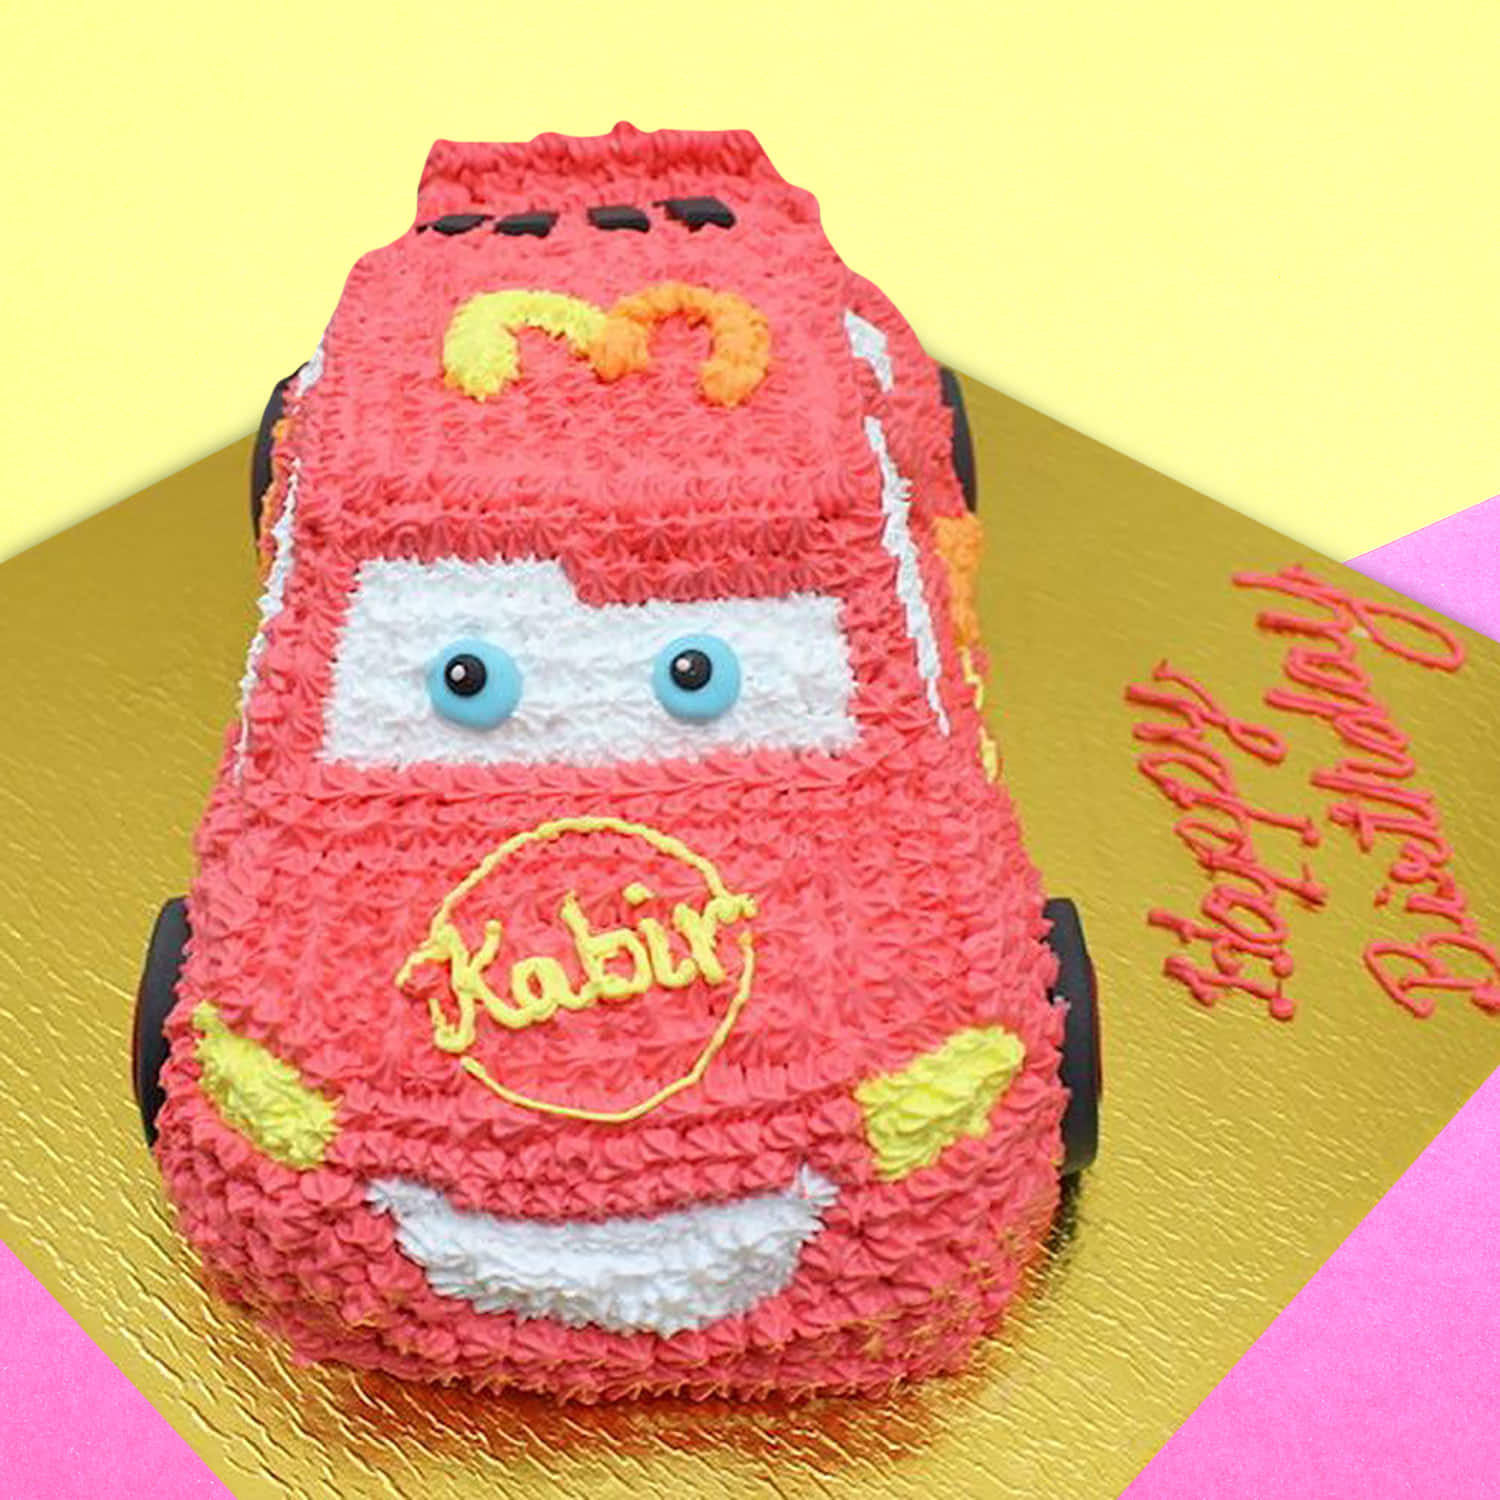 Hippie Car Cake Pictures